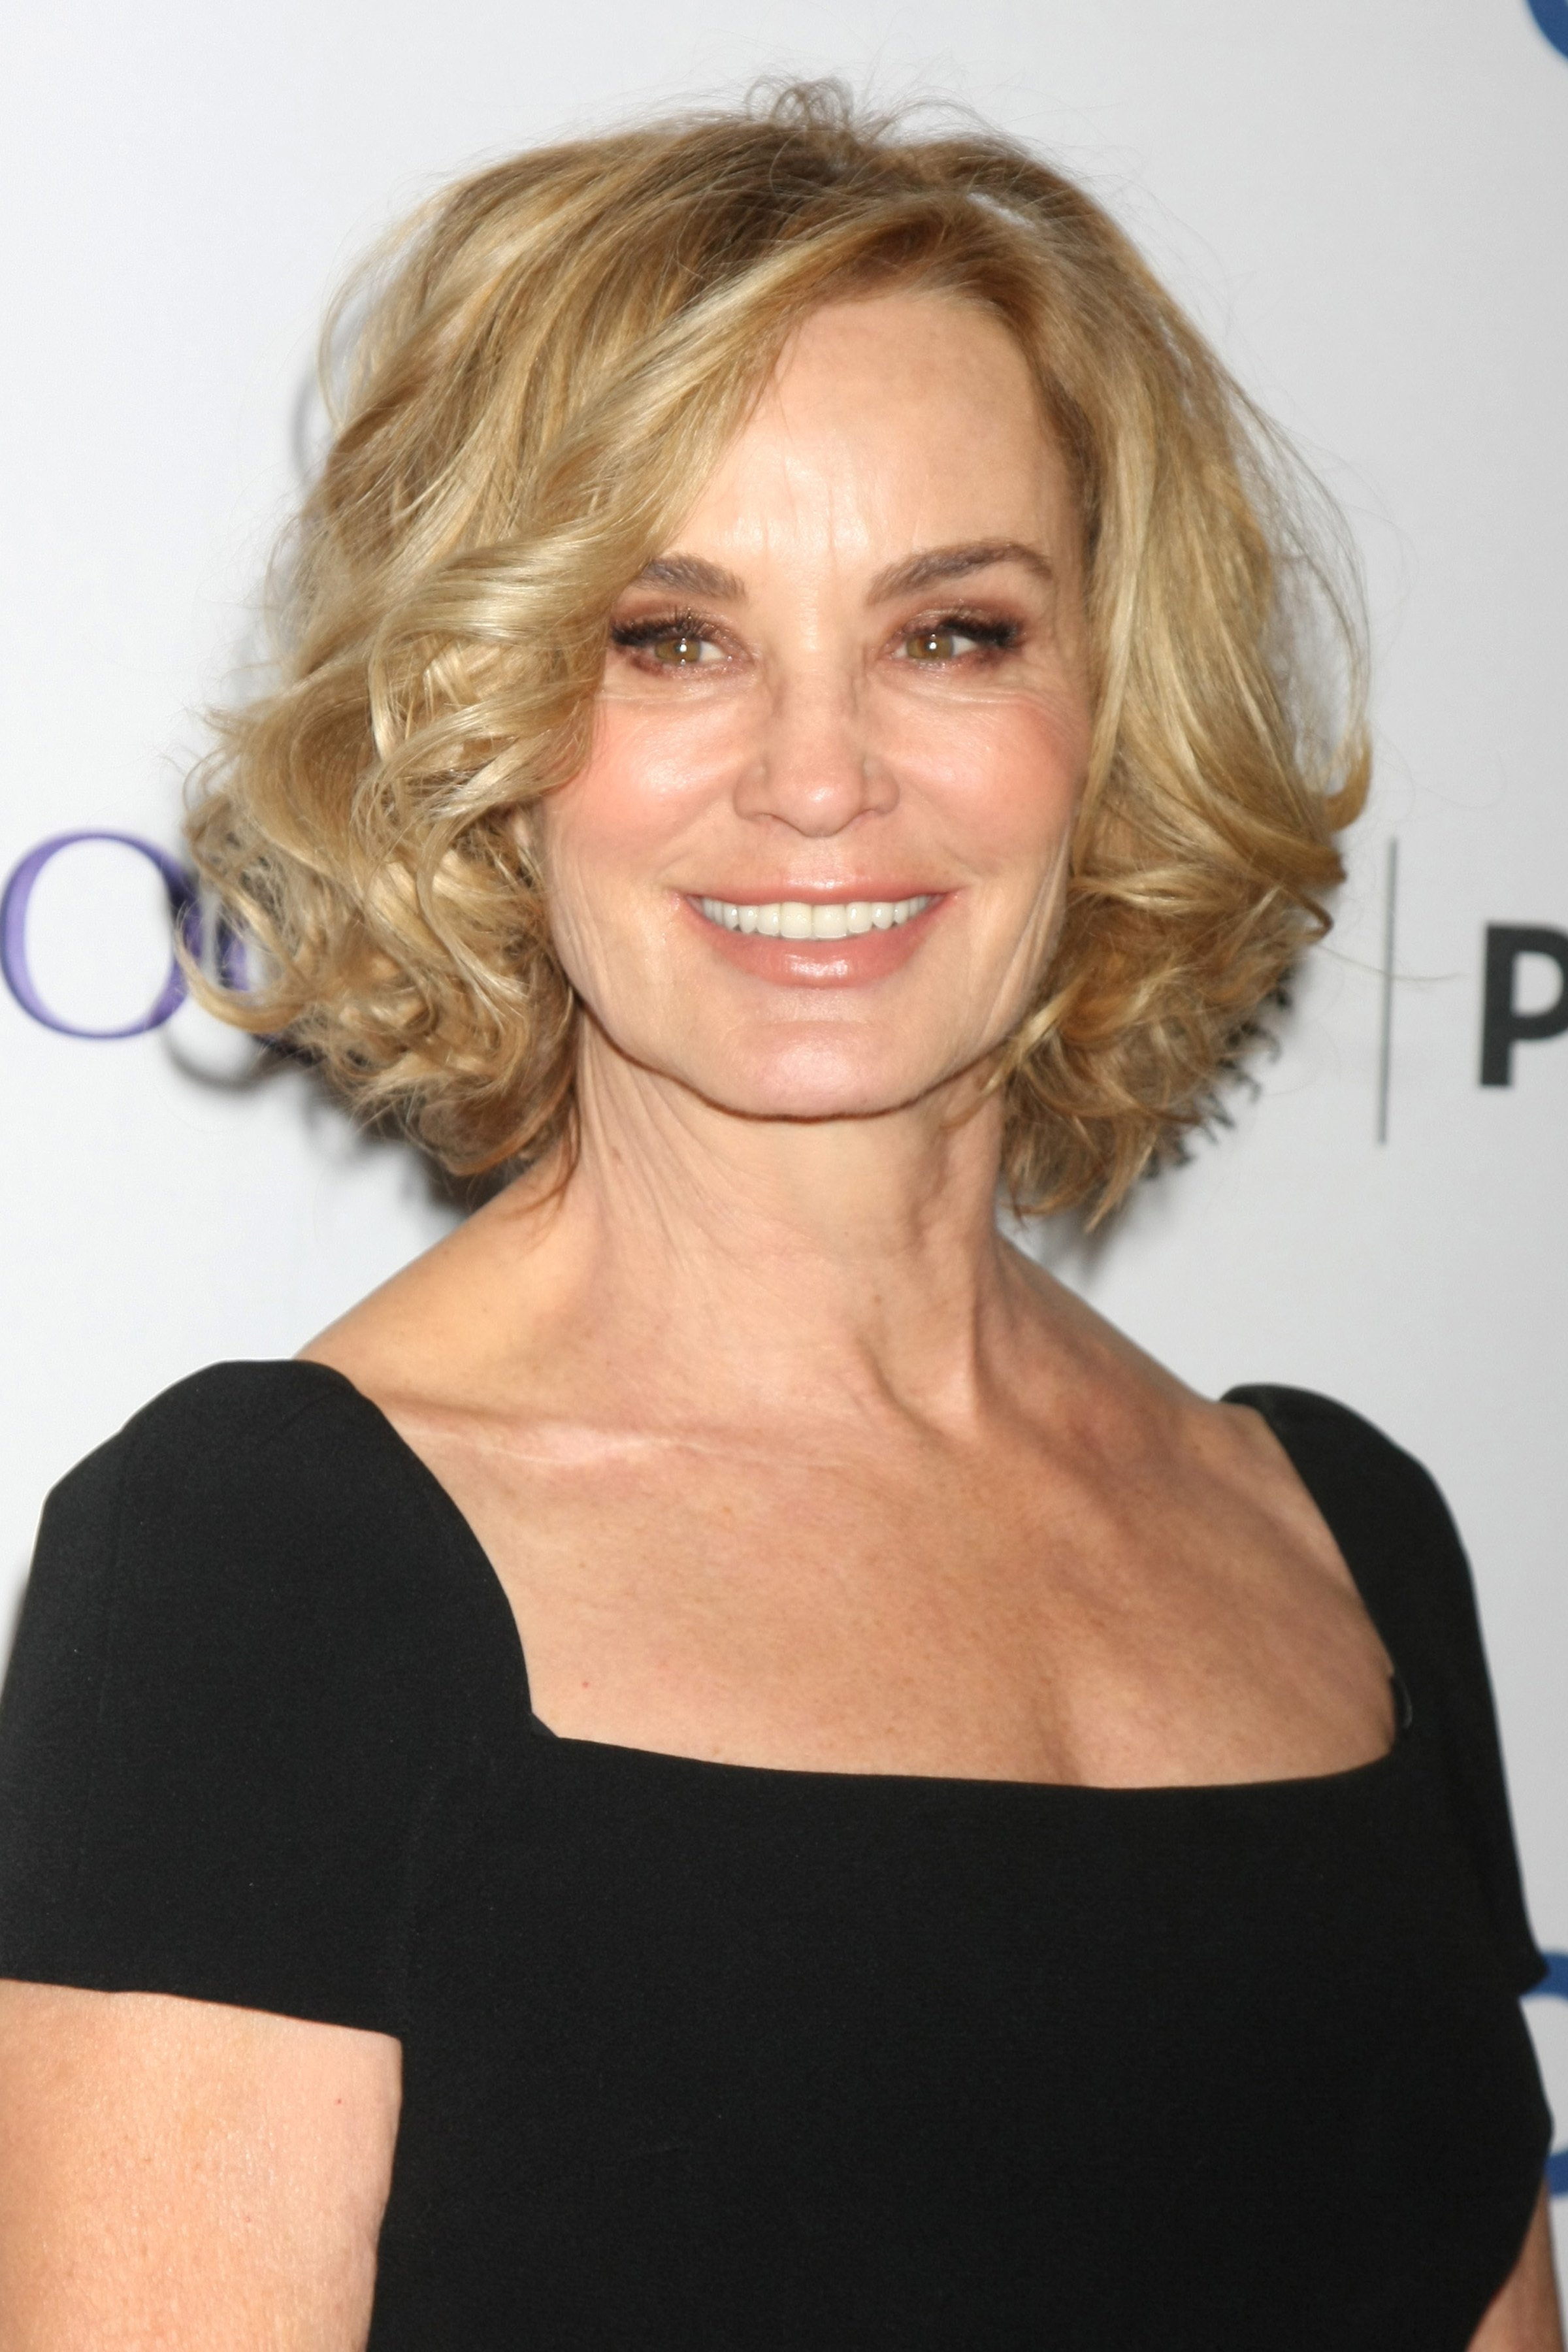 Jessica Lange at the PaleyFEST LA 2015 at the Dolby Theater on March 15, 2015 in Los Angeles, California | Photo: Shutterstock